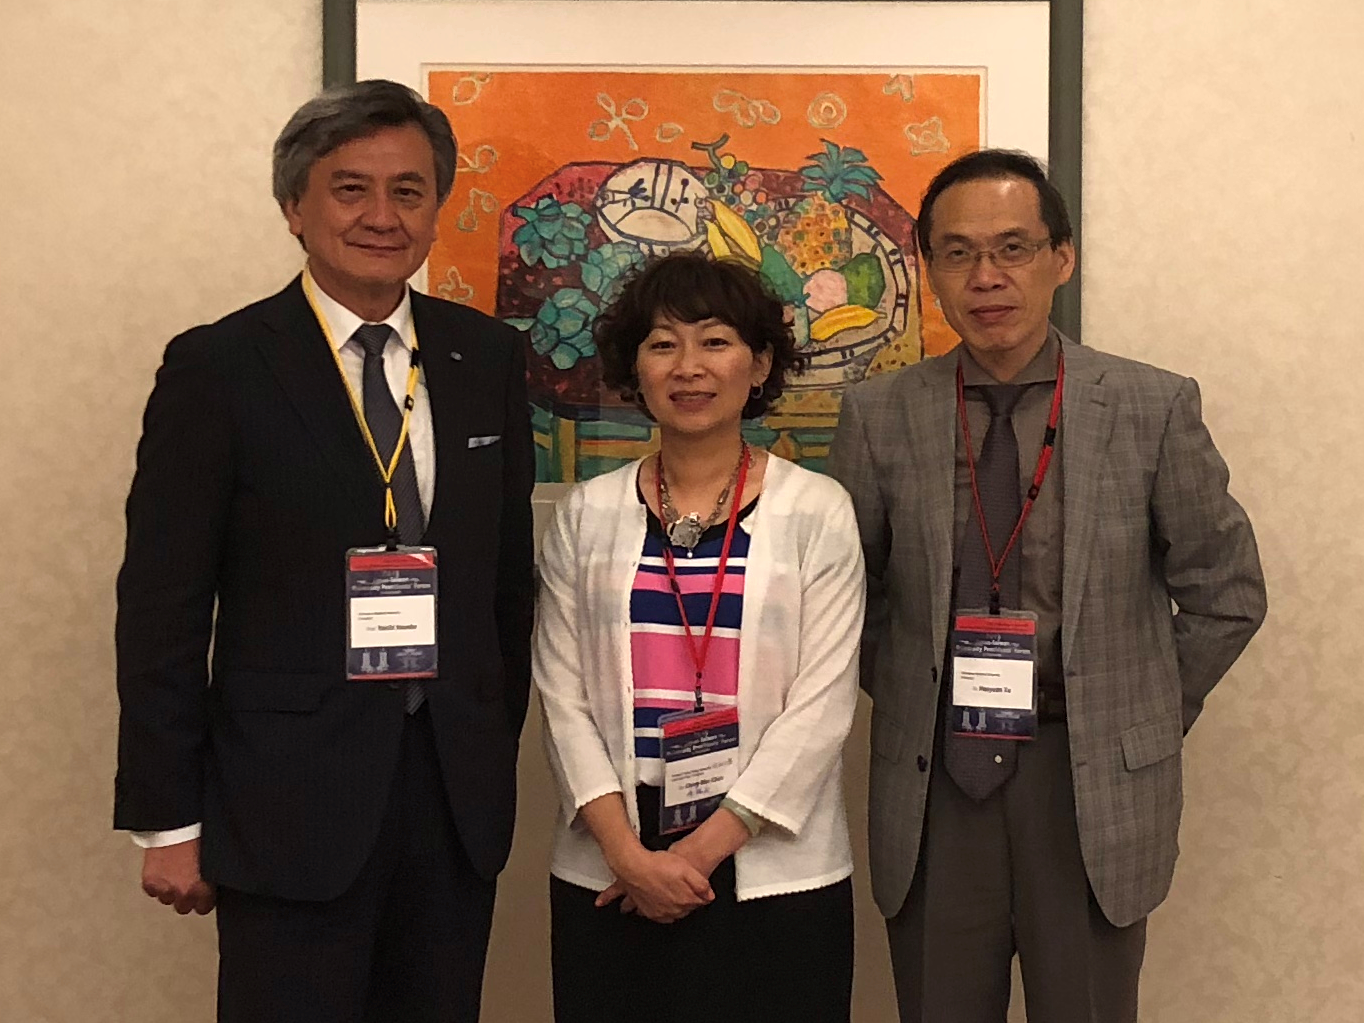 (From left) President Hasebe, Prof. Chen, Prof. Xu